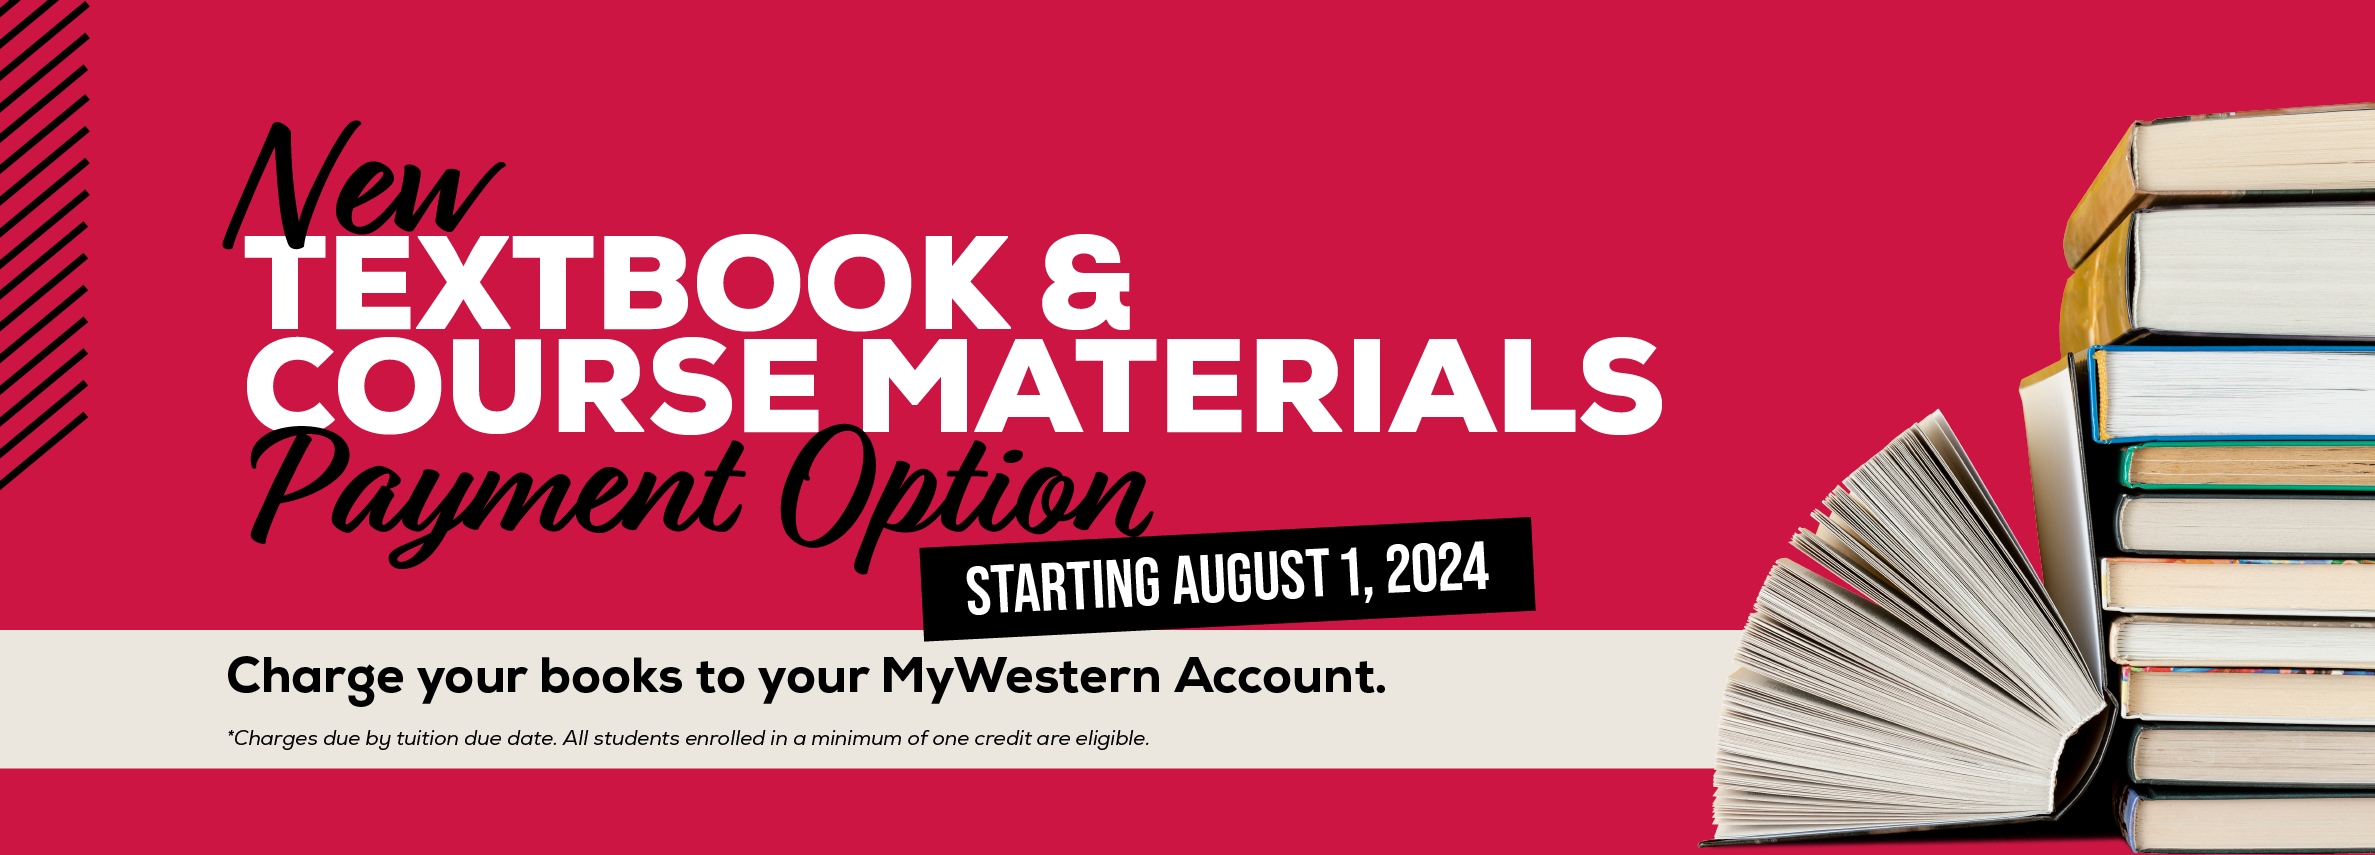 New textbook and course materials payment option. Starting August 1, 2024. Charge your books to your MyWestern account. *Charges due by tuition due date. All students enrolled in a minimum of one credit are eligible.